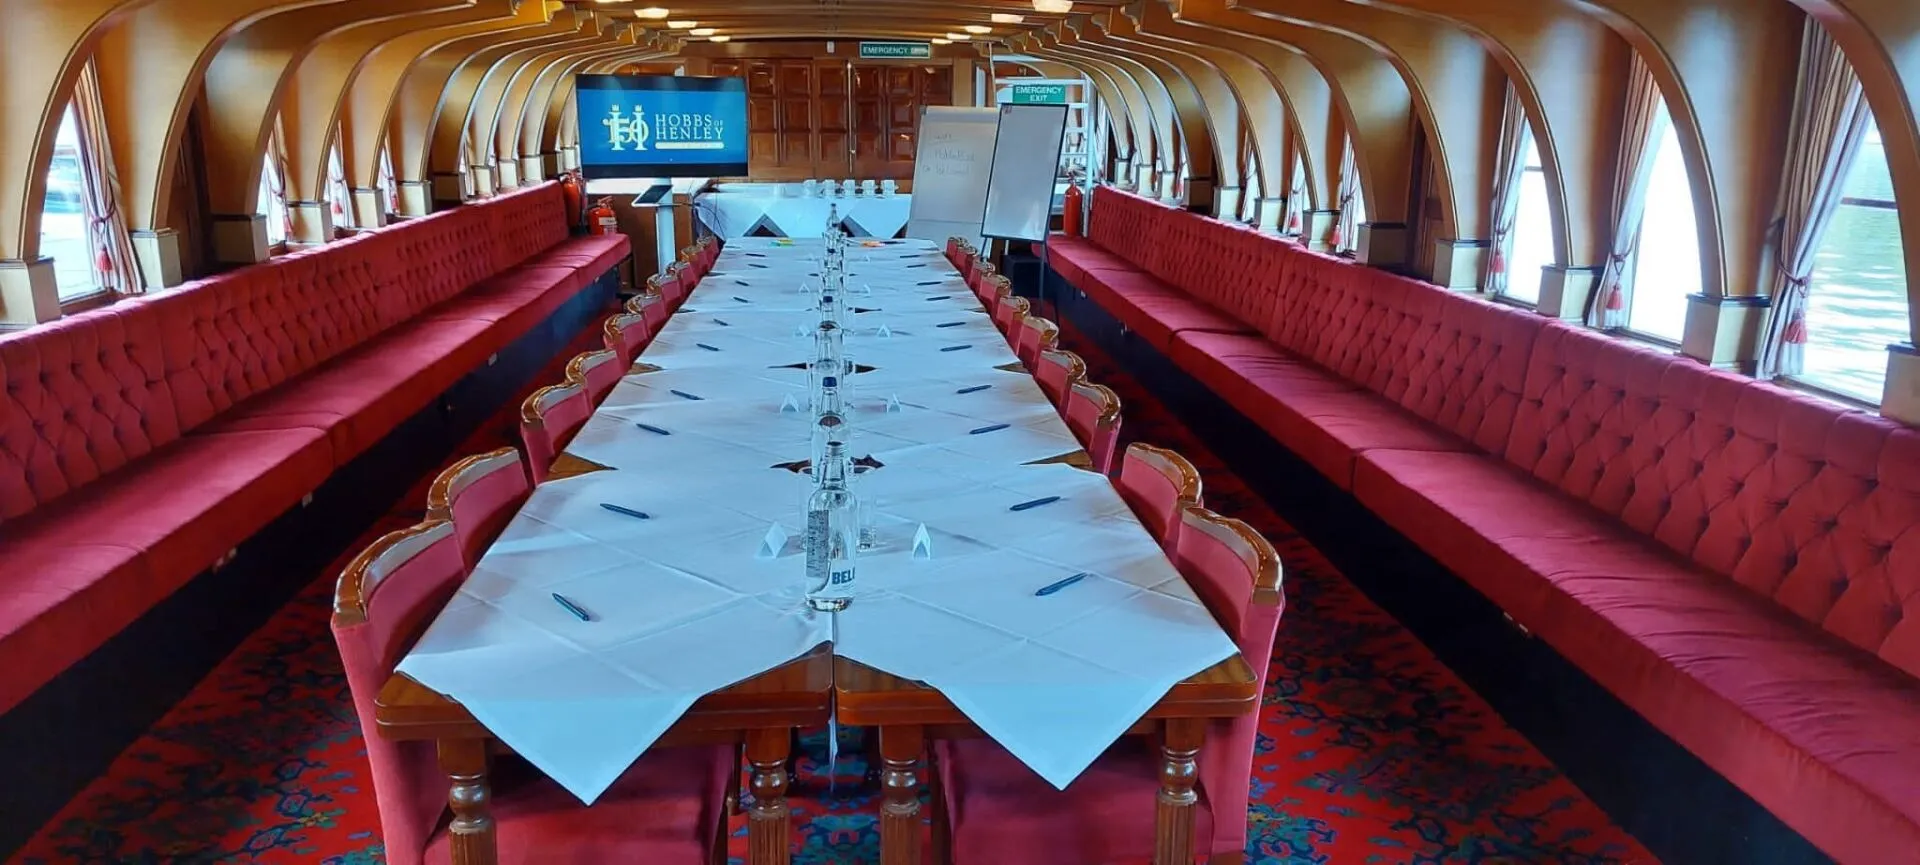 Inside one of the Hobbs of Henley passenger boats, set up for a corporate event. The table is laid for 20 people with bottled water and pens at the ready. There is a TV and whiteboards set up at the back of the boat.